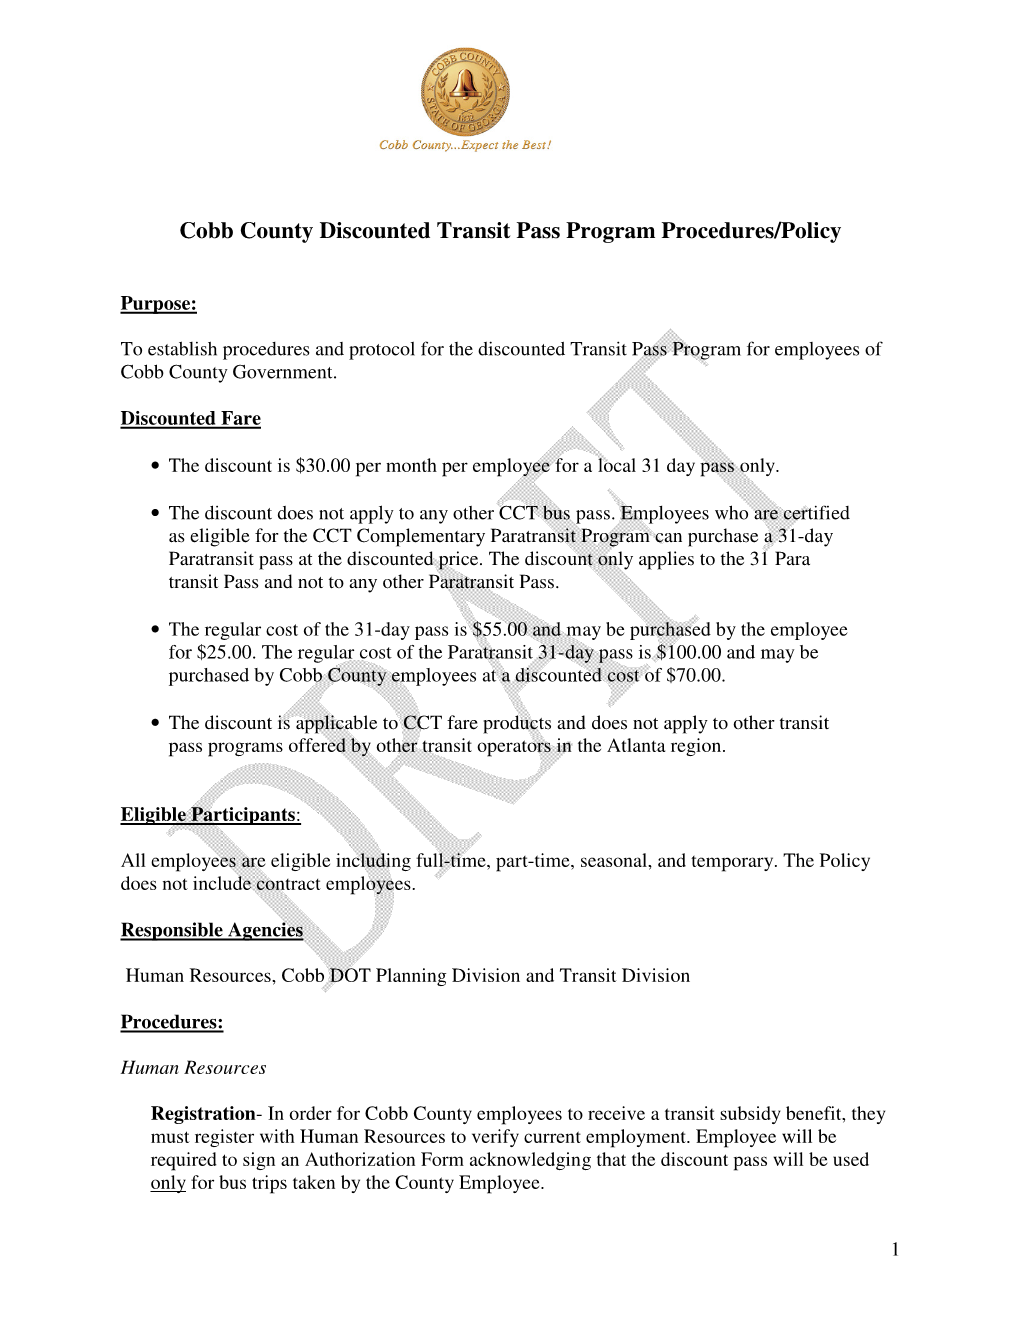 Cobb County Discounted Transit Pass Program Procedures/Policy